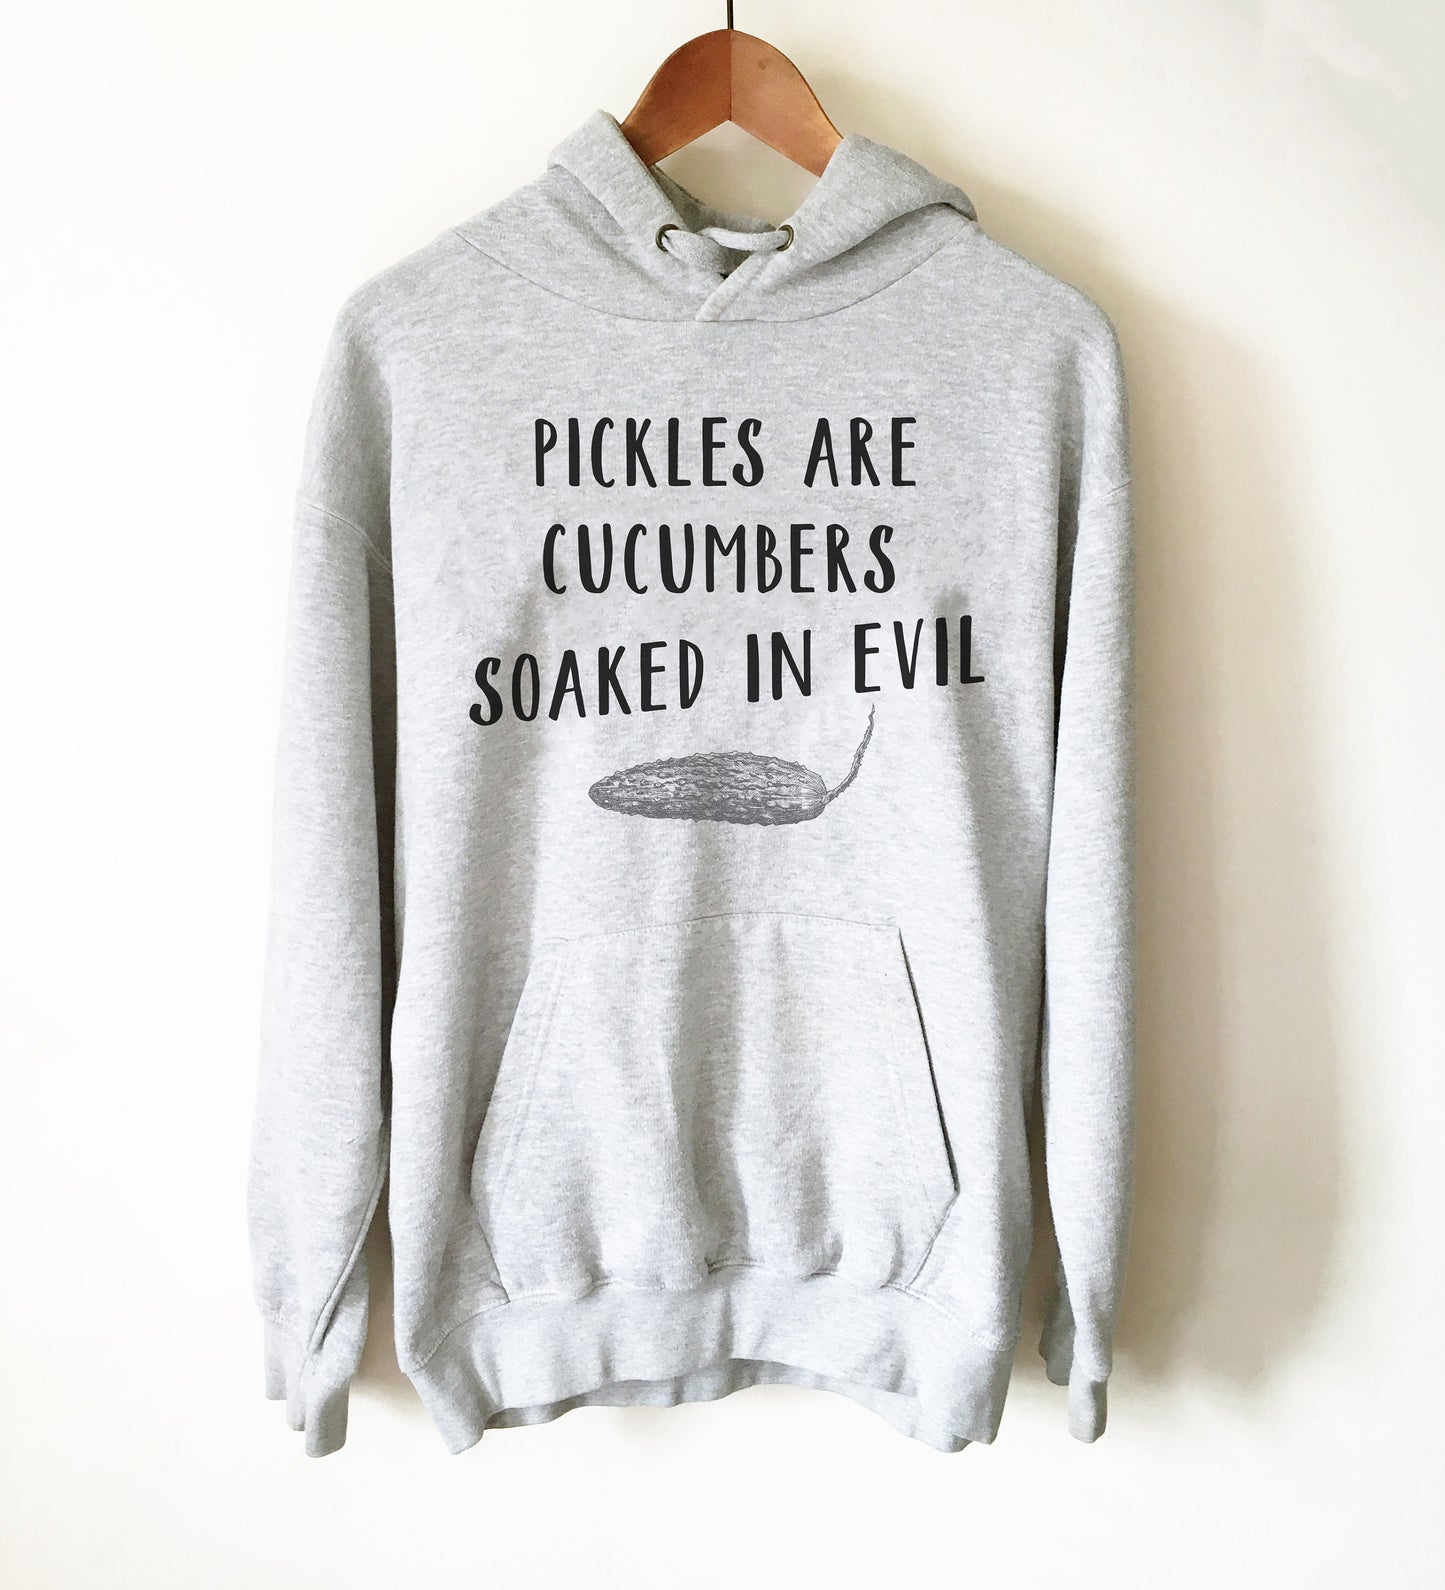 Pickles Are Cucumbers Soaked In Evil Hoodie - Pickle Shirt, Dill Shirt, Pickles Are Evil, Pickle Hater, Funny Food Gift